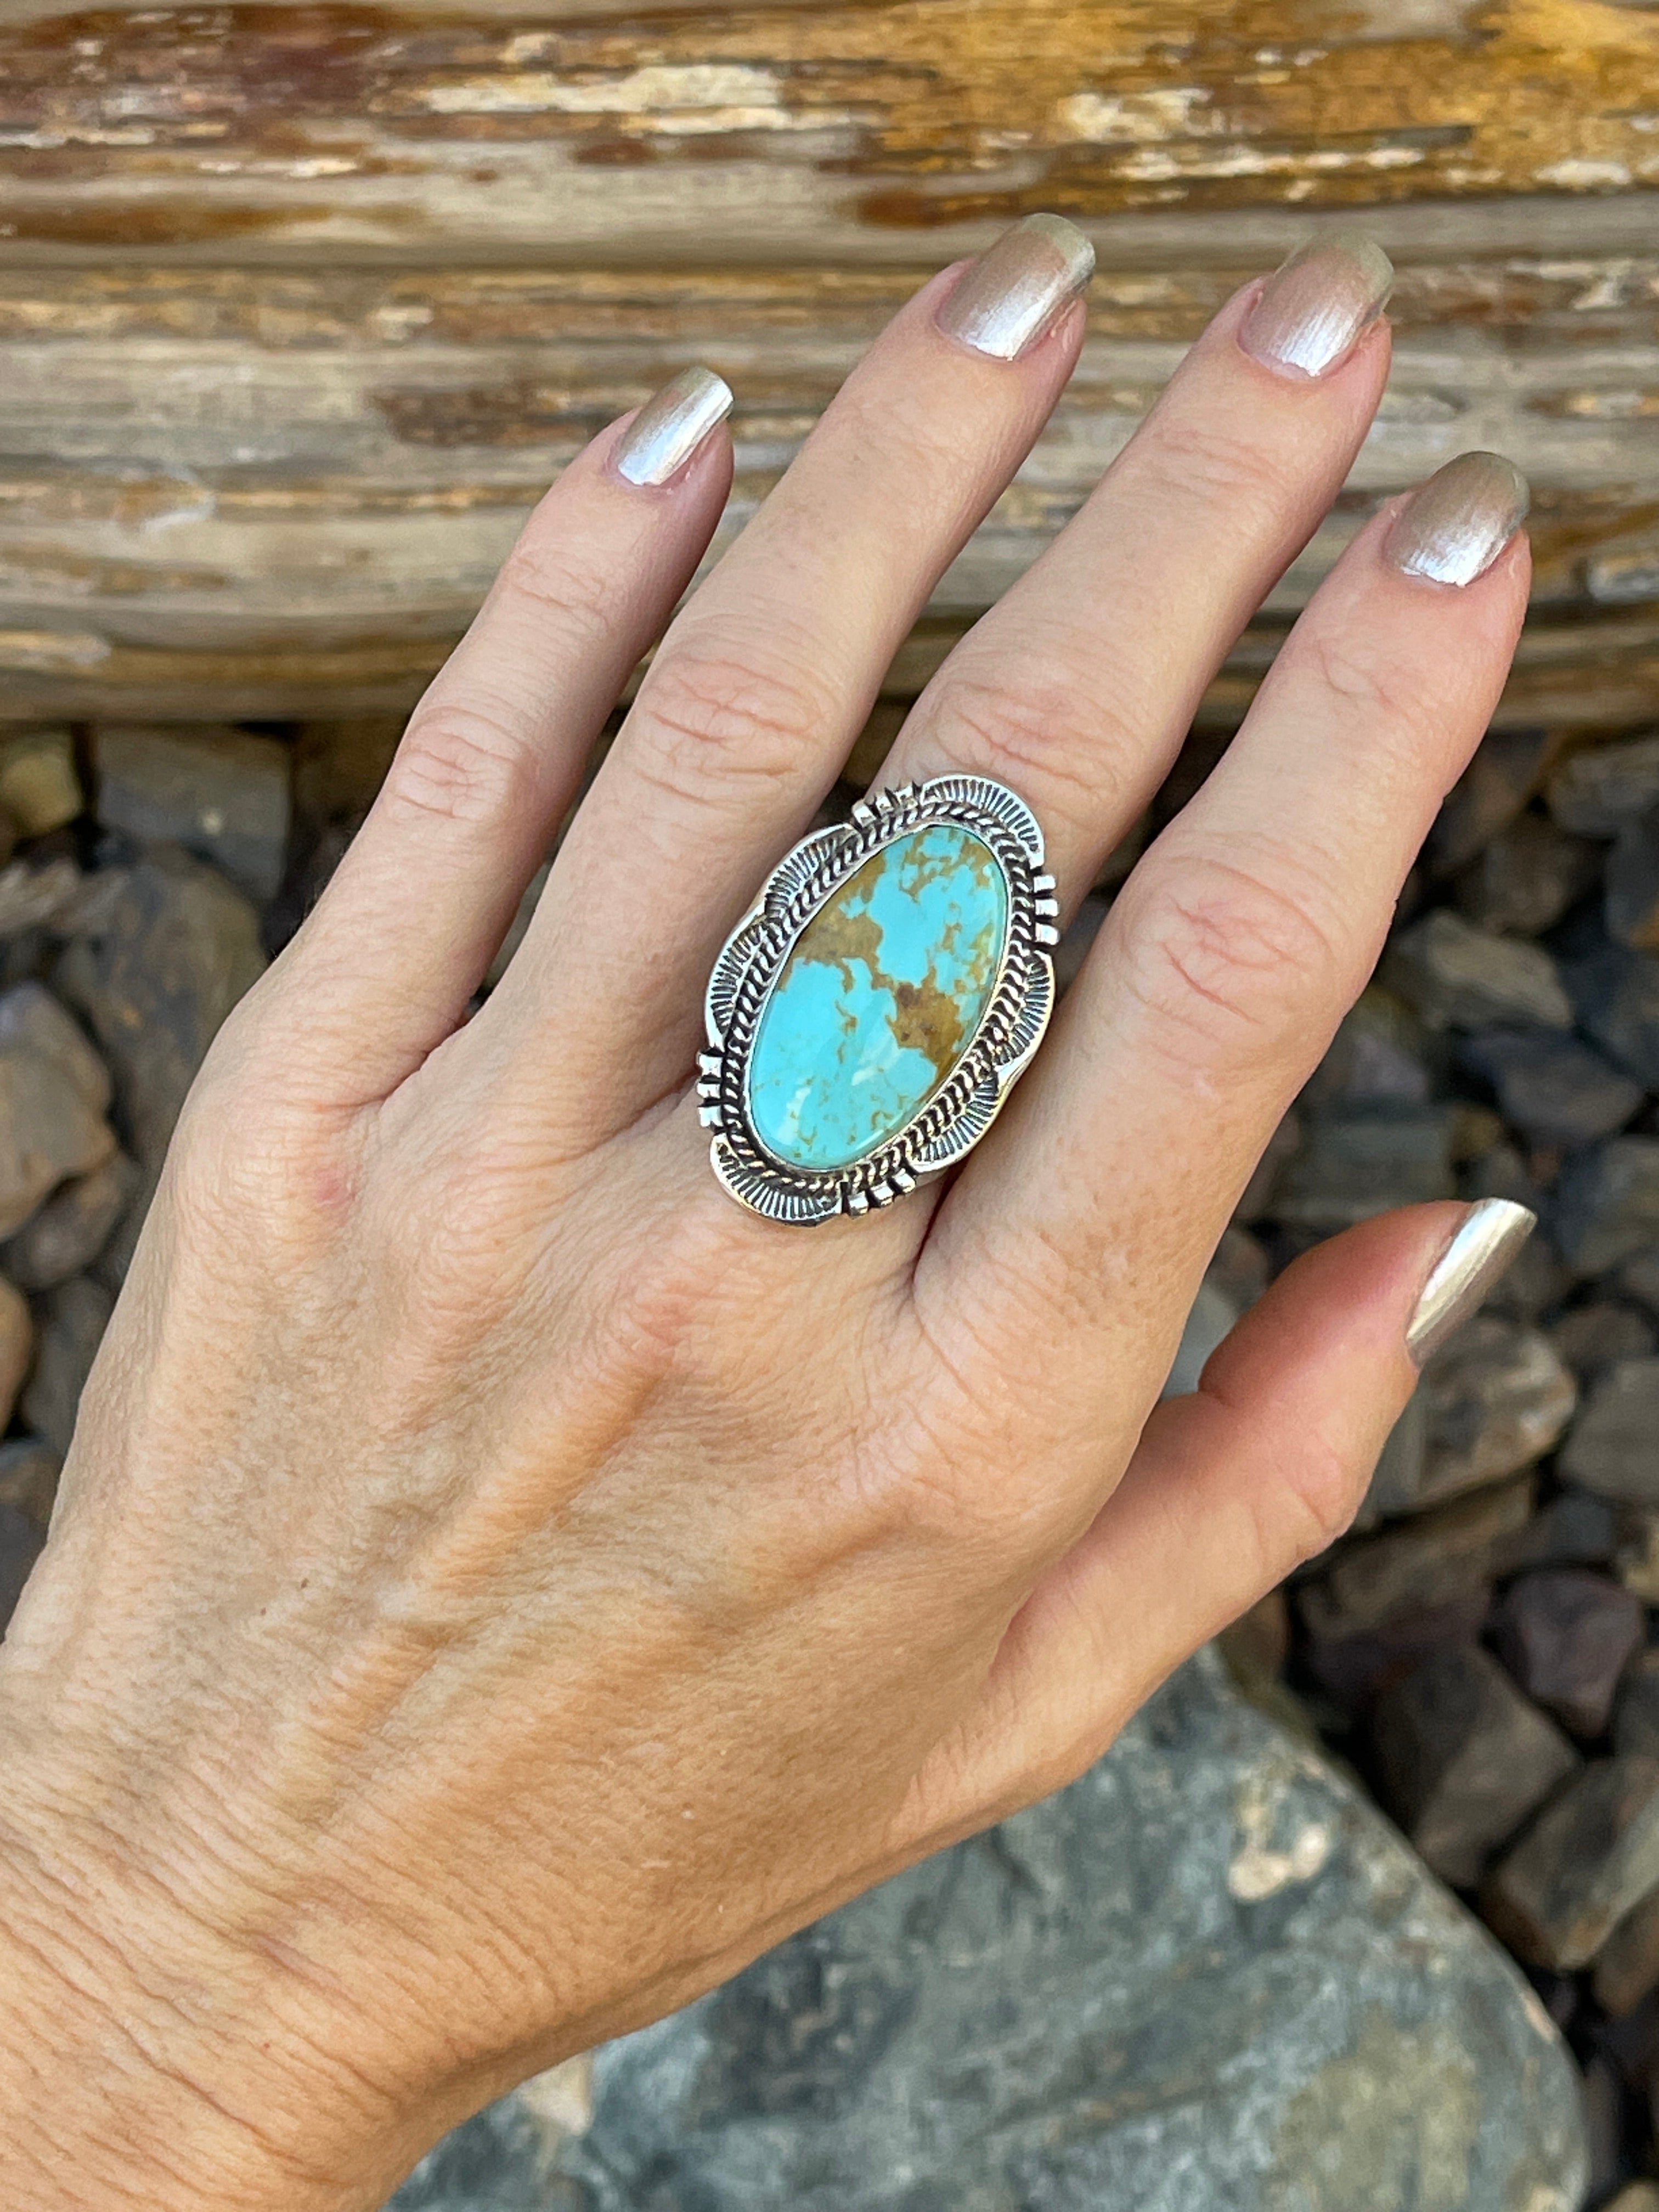 Handmade Sterling Silver Kingman Turquoise Ring with Hand Stamp Trim - Size 7 1/2